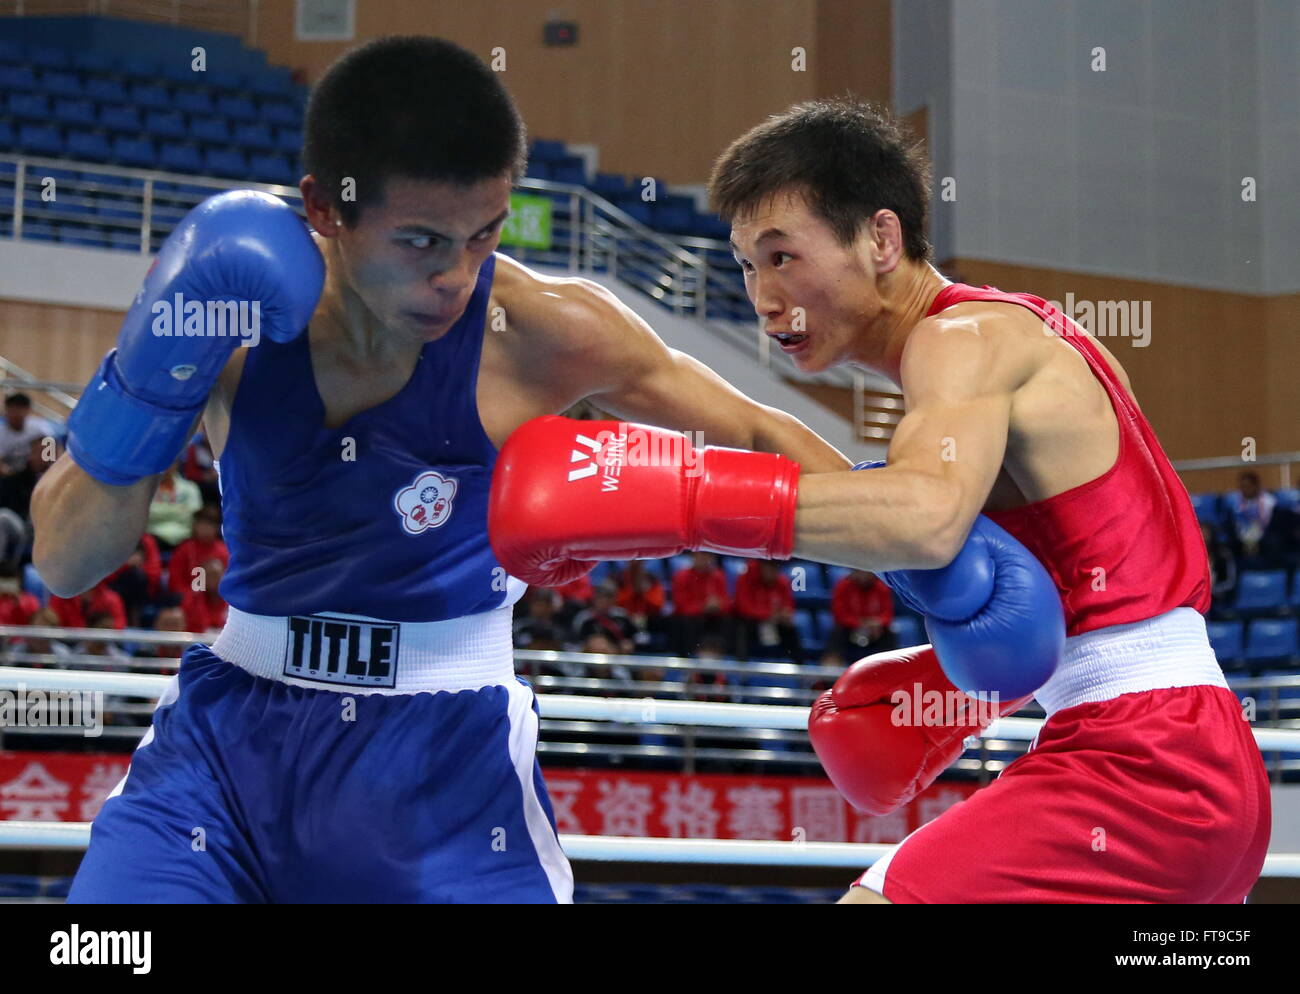 Qian'an, China's Hebei Province. 26th Mar, 2016. Enkh-Amar Kharkhuu(R) of Mongolia competes with Jan Chun-Hsien of Chinese Taipei during their men's 52kg category of Asia/Oceania Zone boxing event qualifier for 2016 Rio Olympic Games in Qian'an, north China's Hebei Province, March 26, 2016. Enkh-Amar Kharkhuu won the match 3-0. Credit:  Yang Shiyao/Xinhua/Alamy Live News Stock Photo